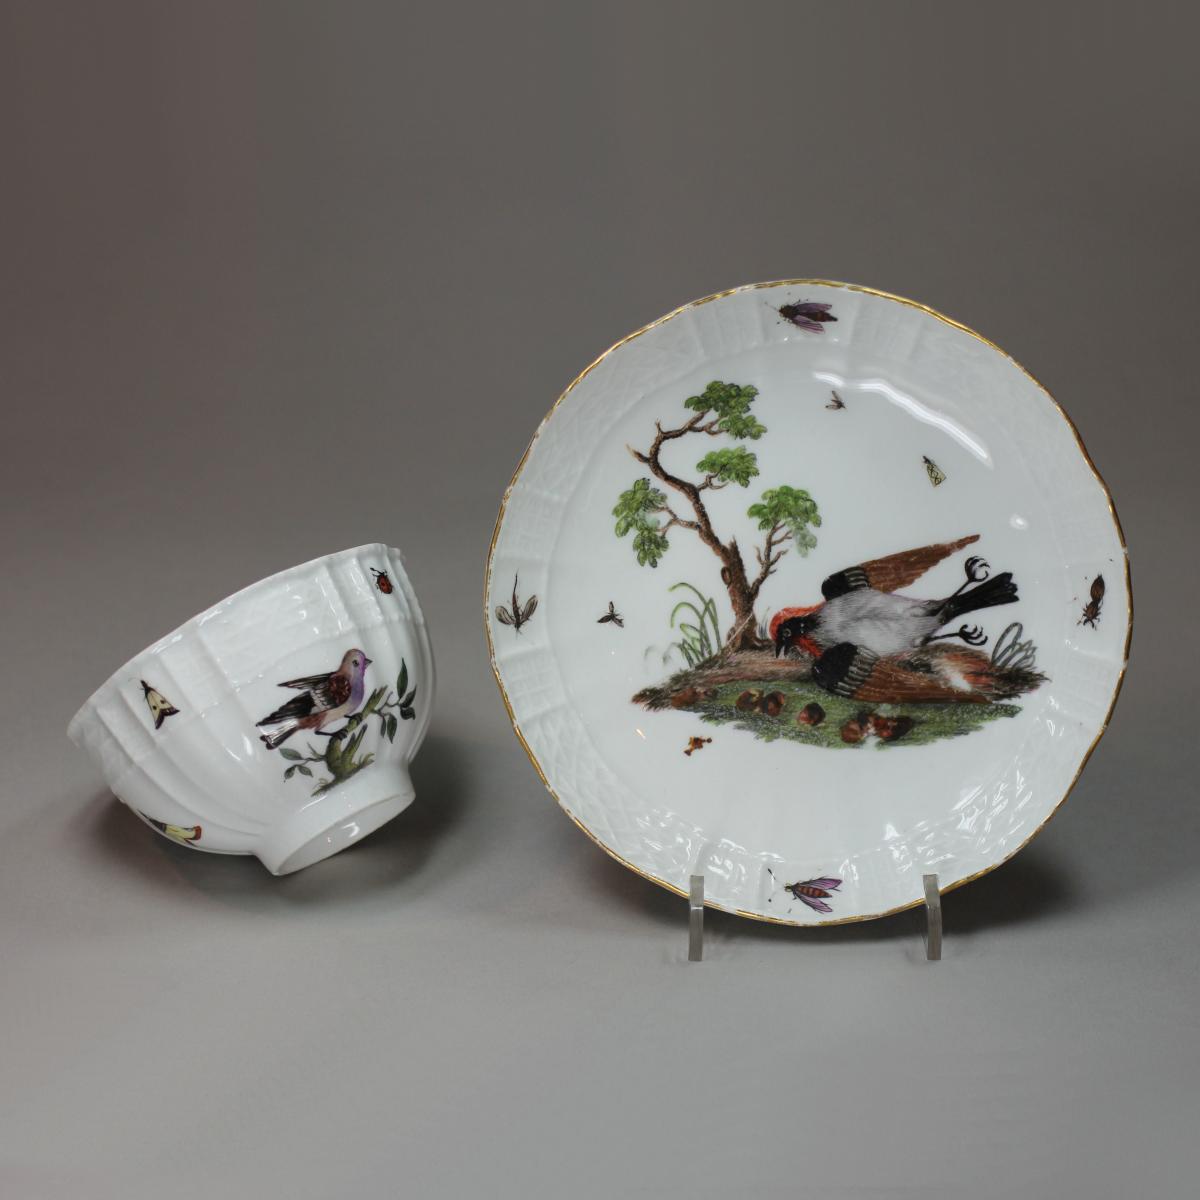 Meissen ornithological teabowl and saucer, circa 1760-70